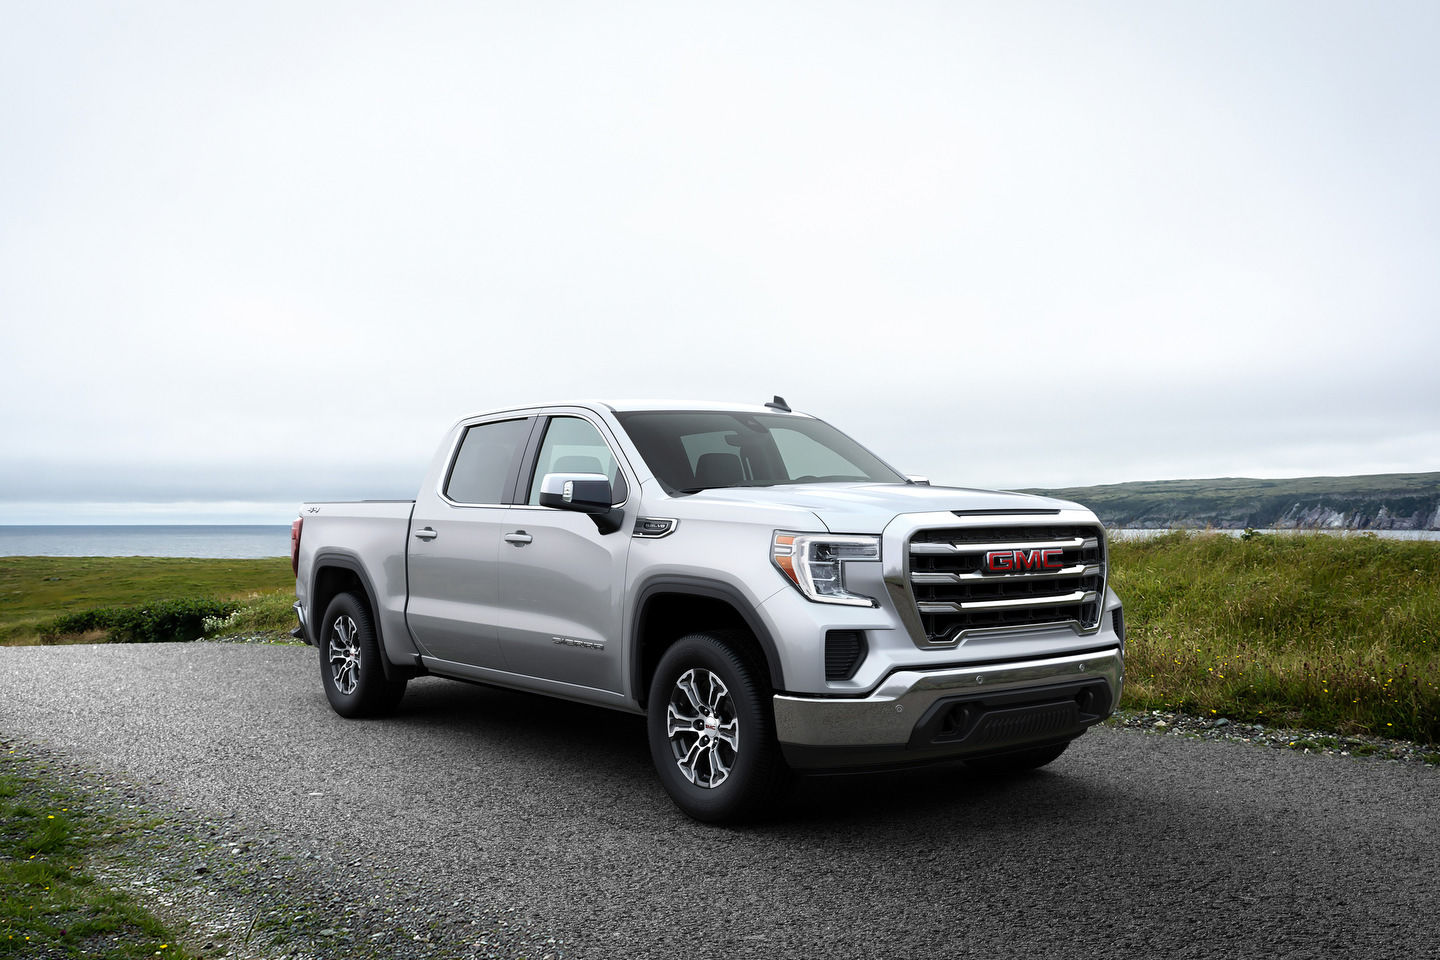 Now is the perfect time to buy a 2021 GMC Sierra